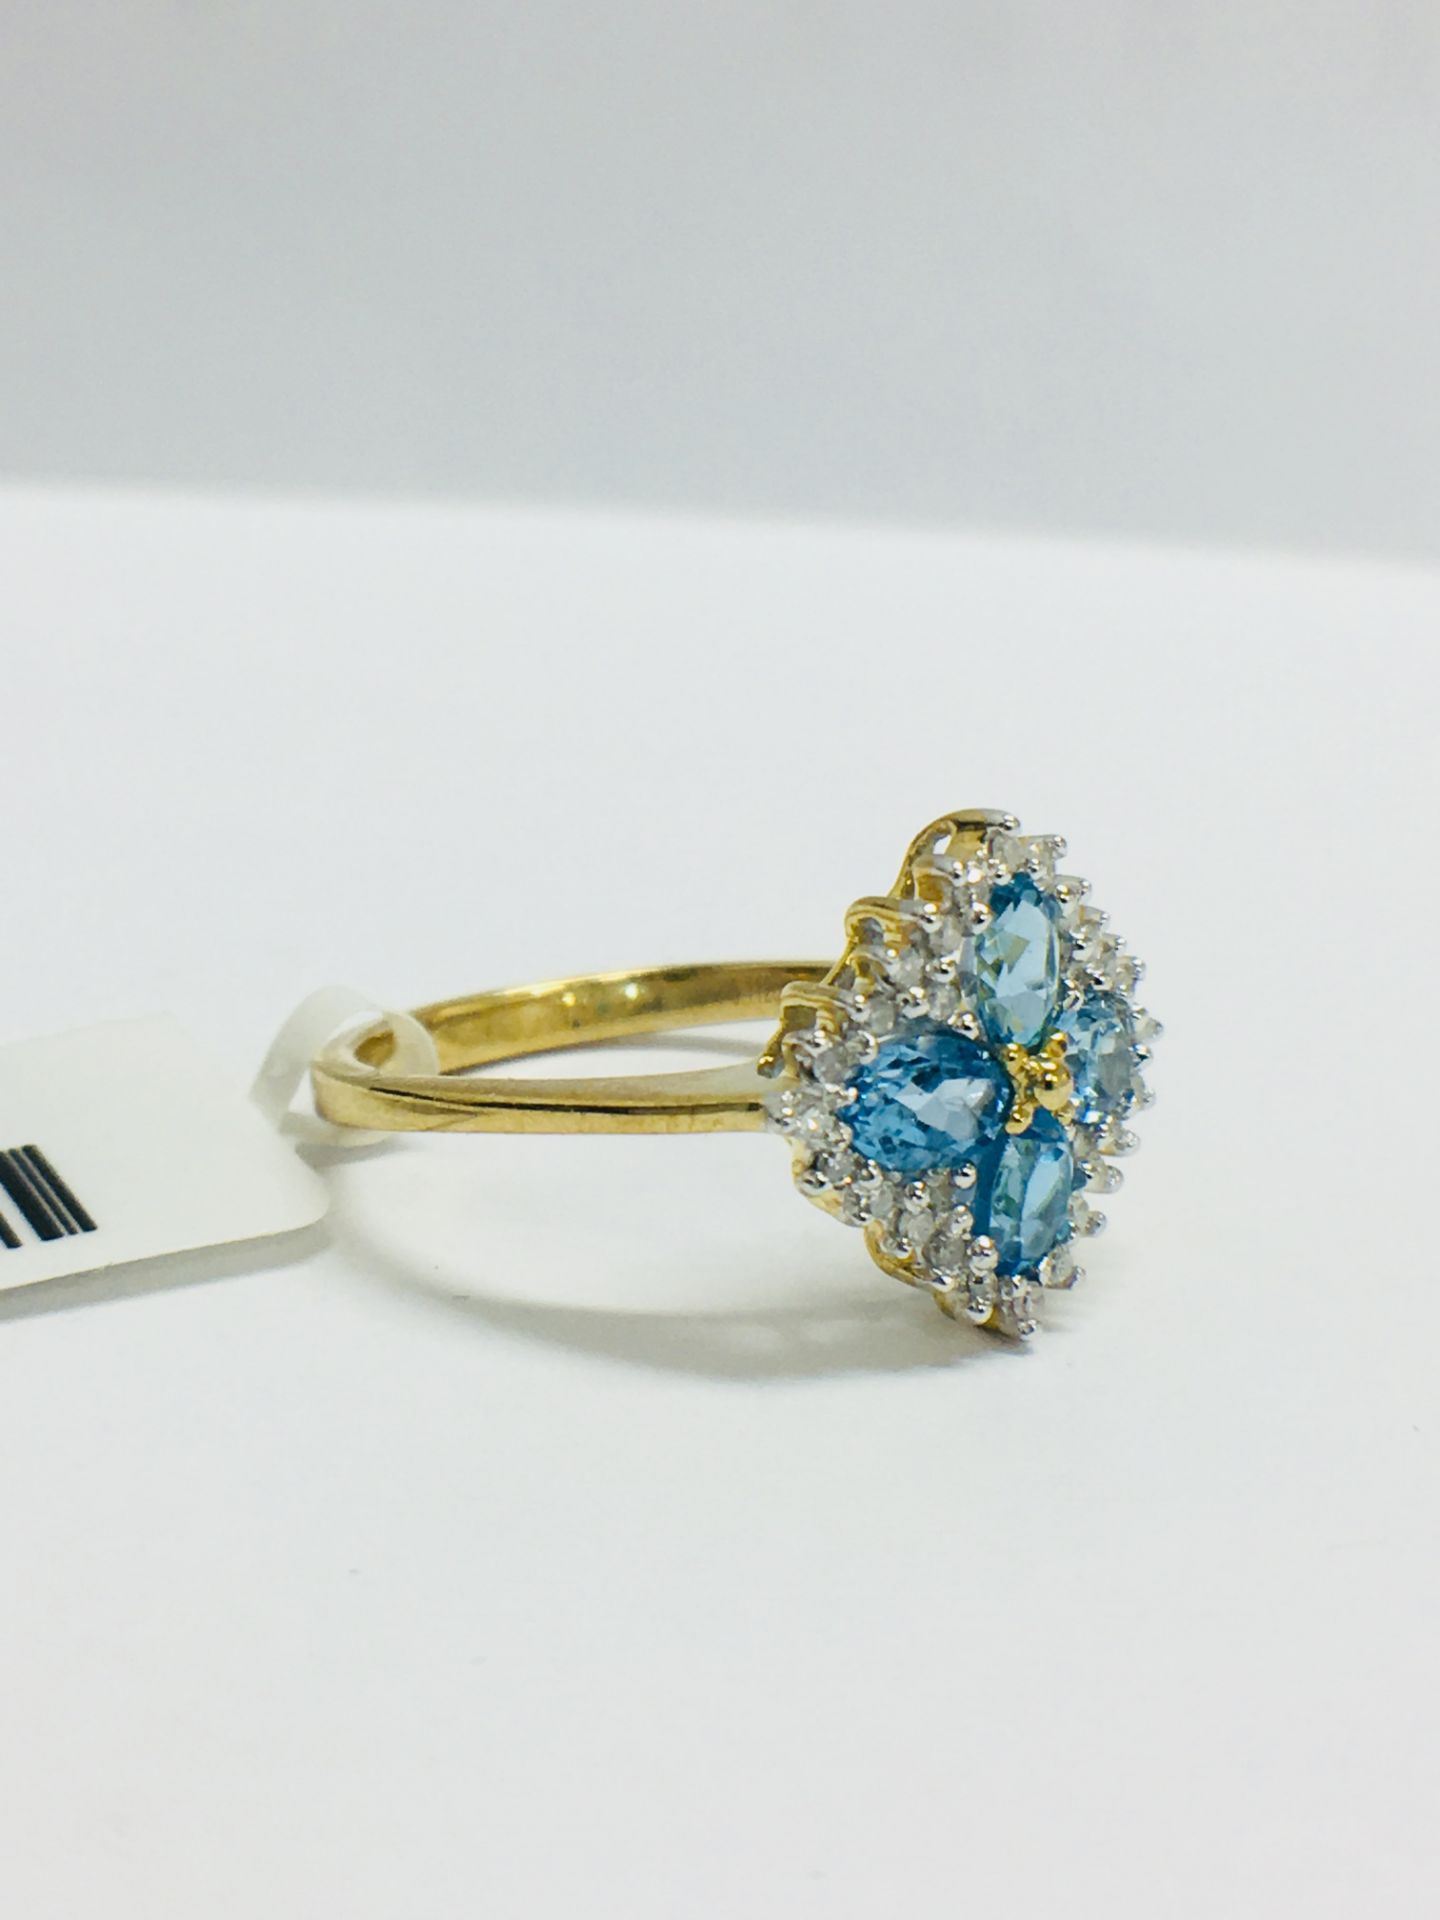 9Ct Yellow Gold Blue Topaz Diamond Cluster Ring - Image 8 of 9